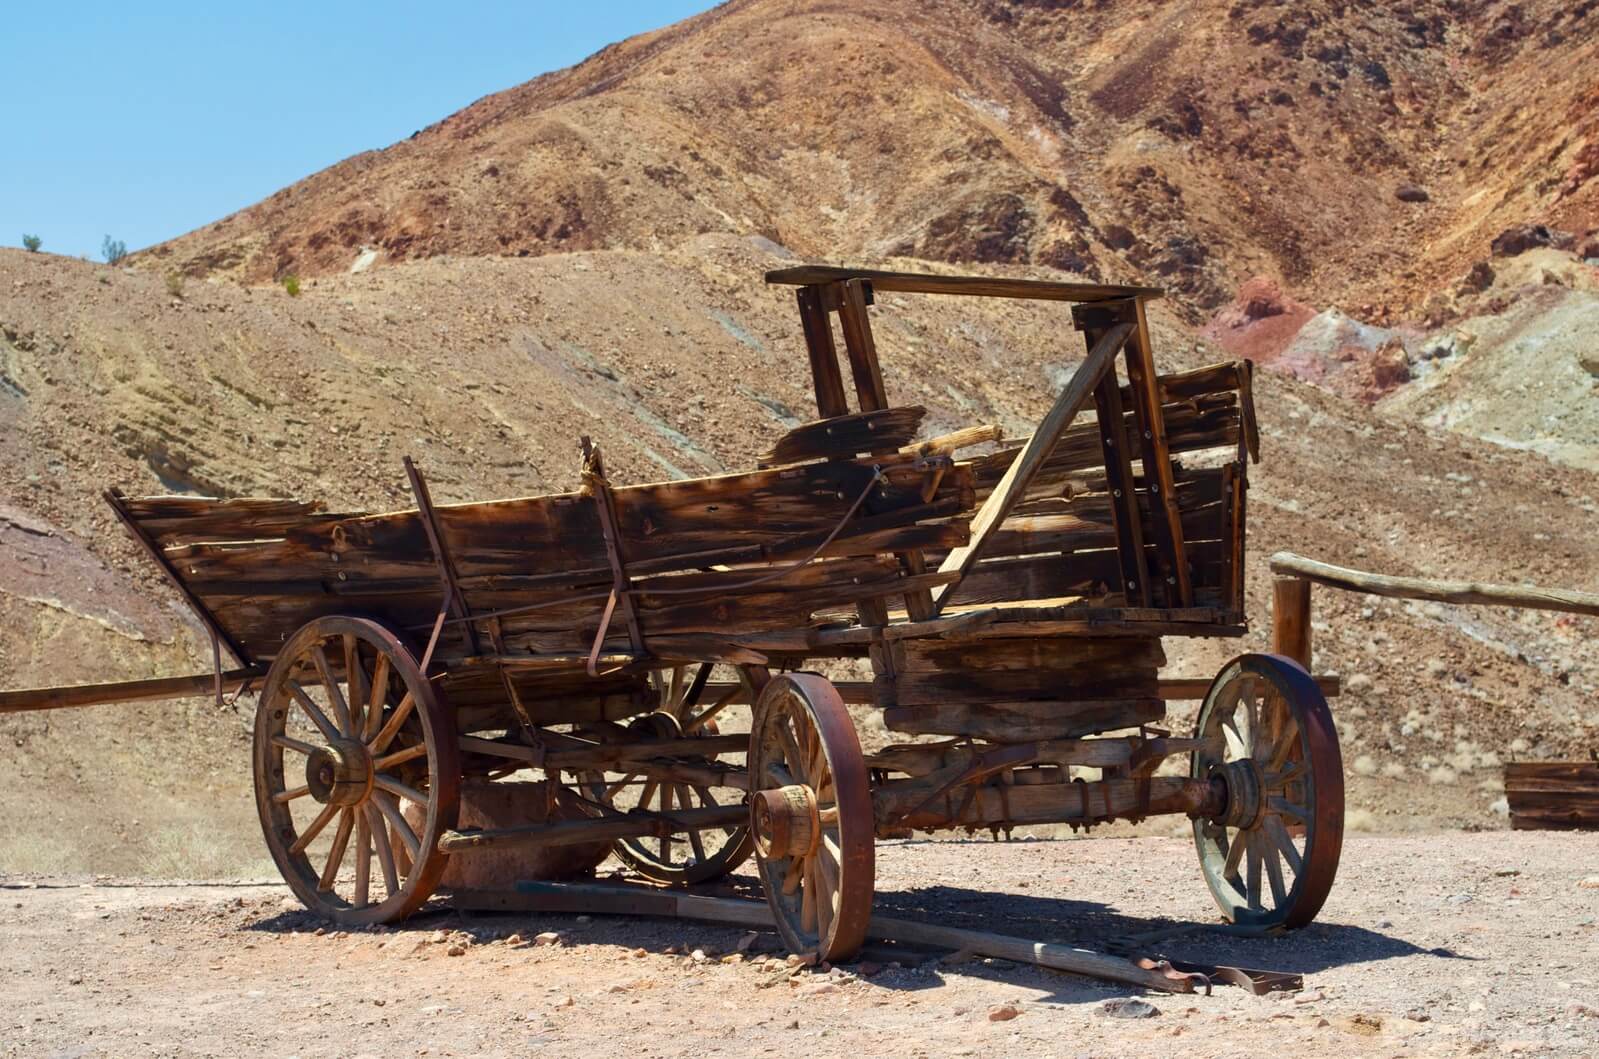 Image of Calico Ghost Town by Steve West